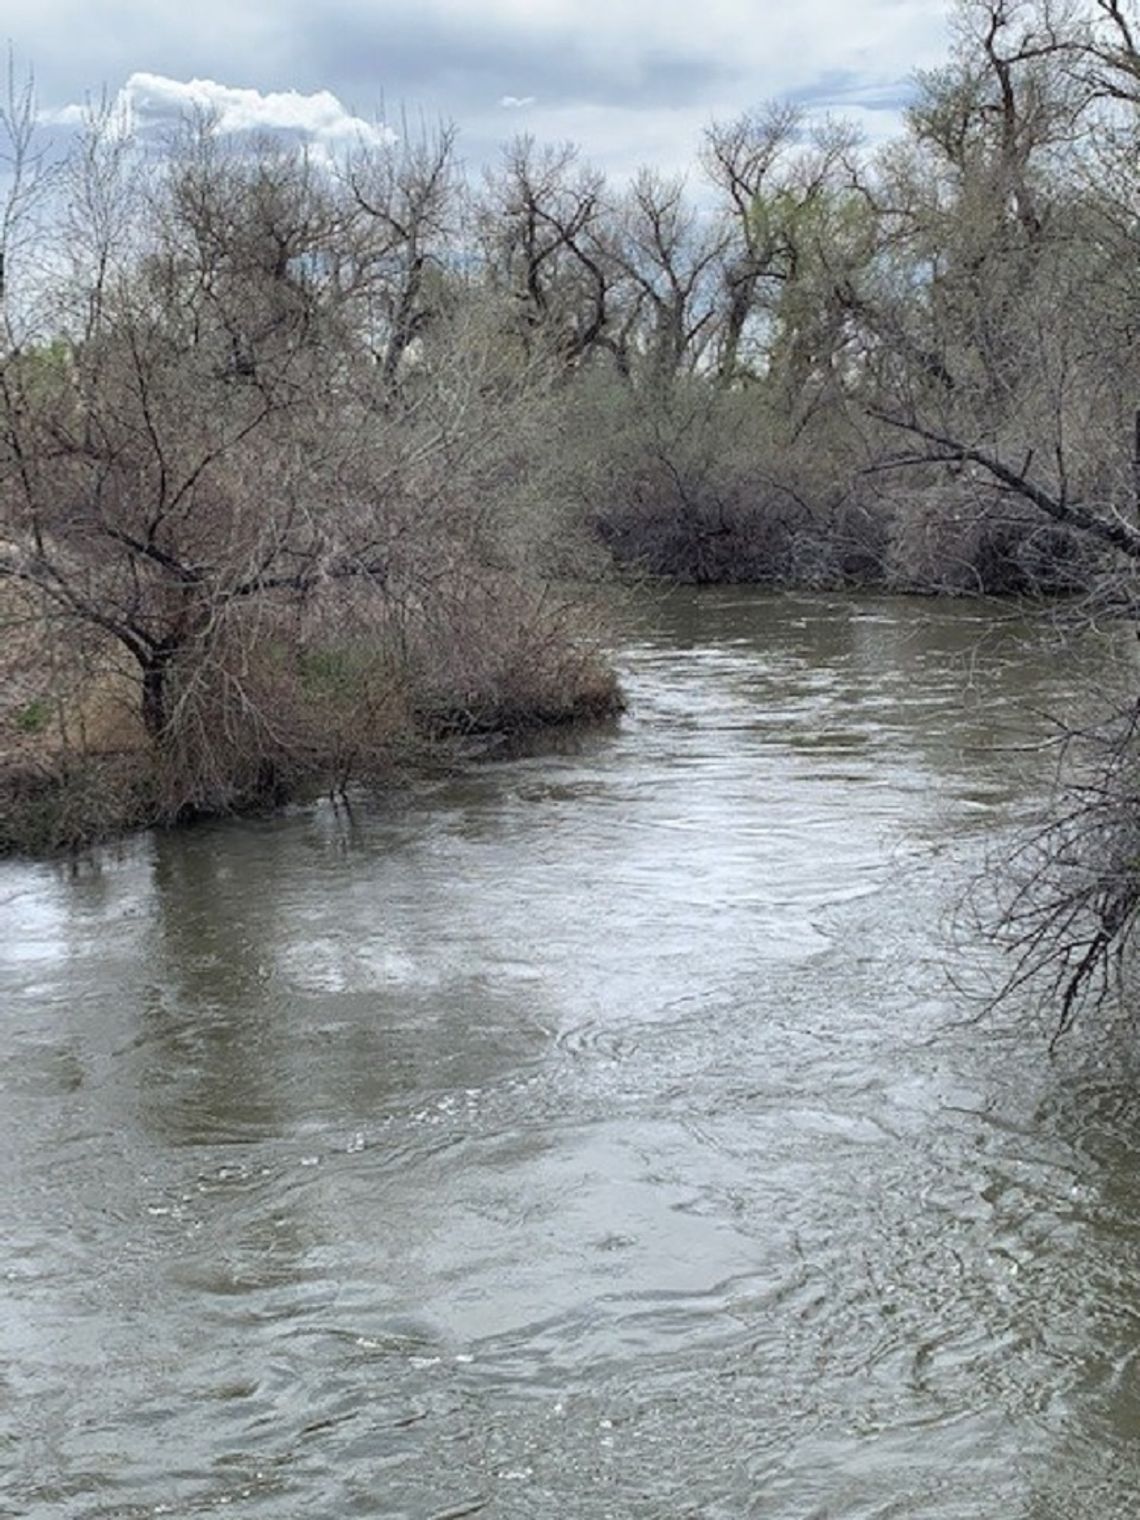 Ask the Owl – The Carson River